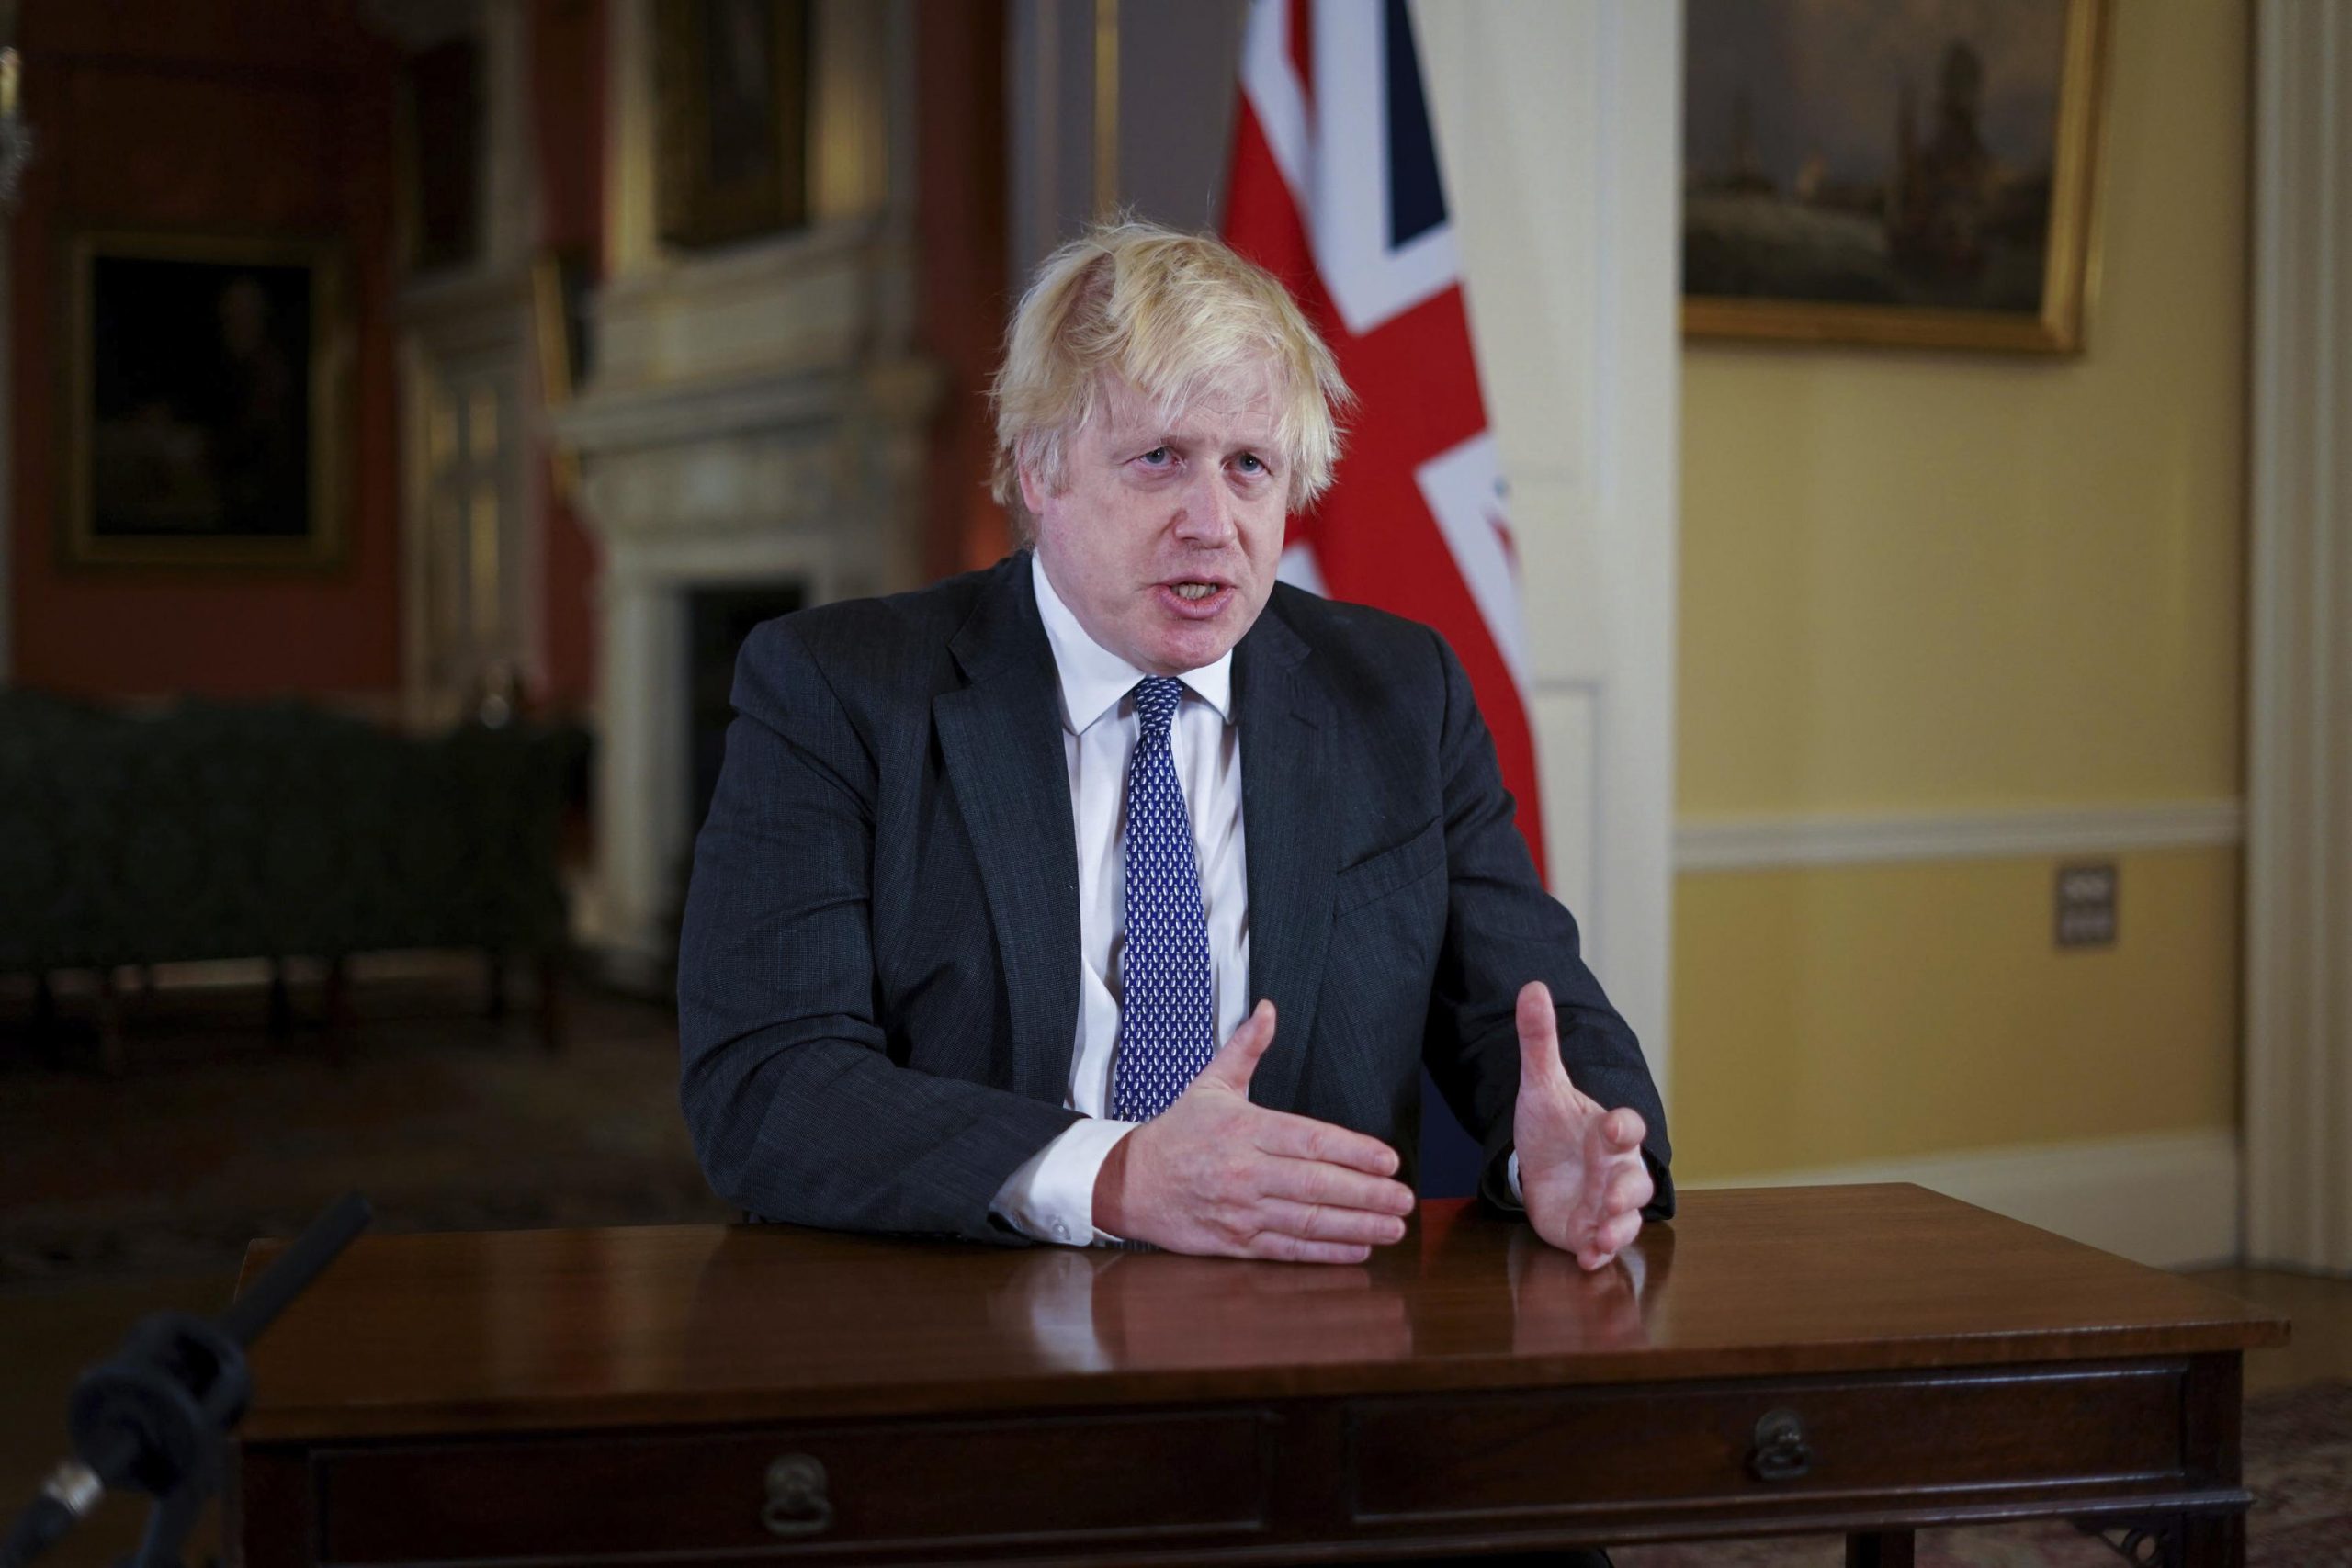 Boris Johnson announces end of Covid legal restrictions in England